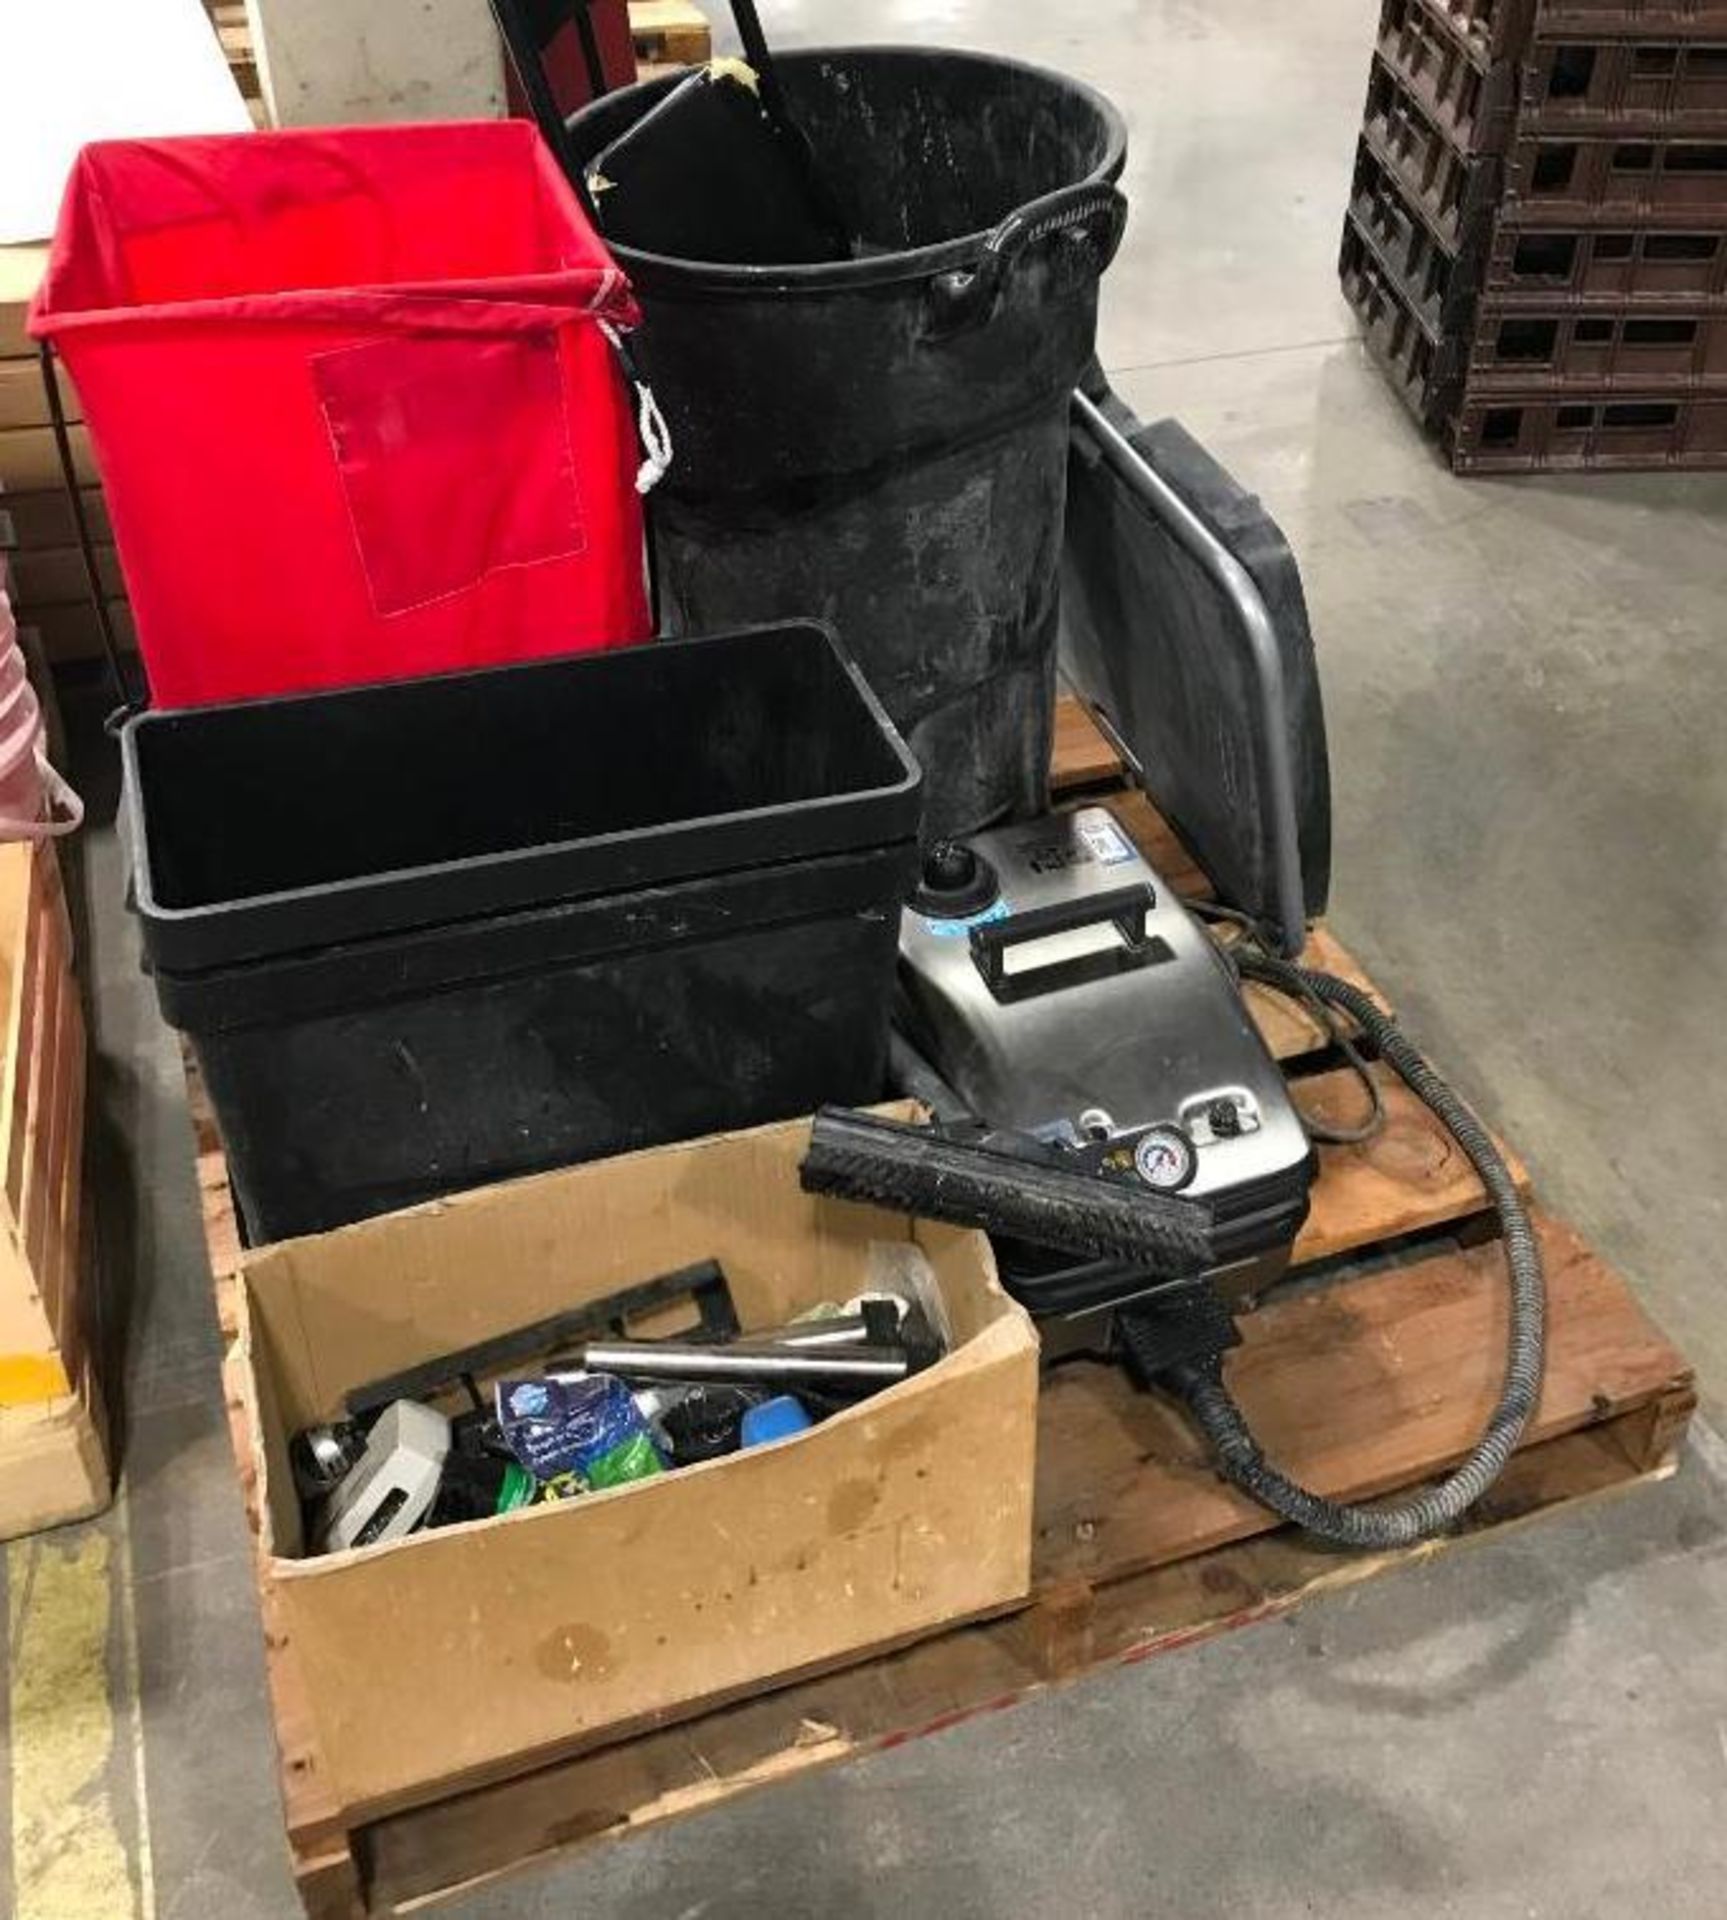 PALLET OF ASSORTED JANITORIAL SUPPLIES INCLUDING: VAPOR SYSTEM 900-C HOT DETERGENT INJECTION STEAM